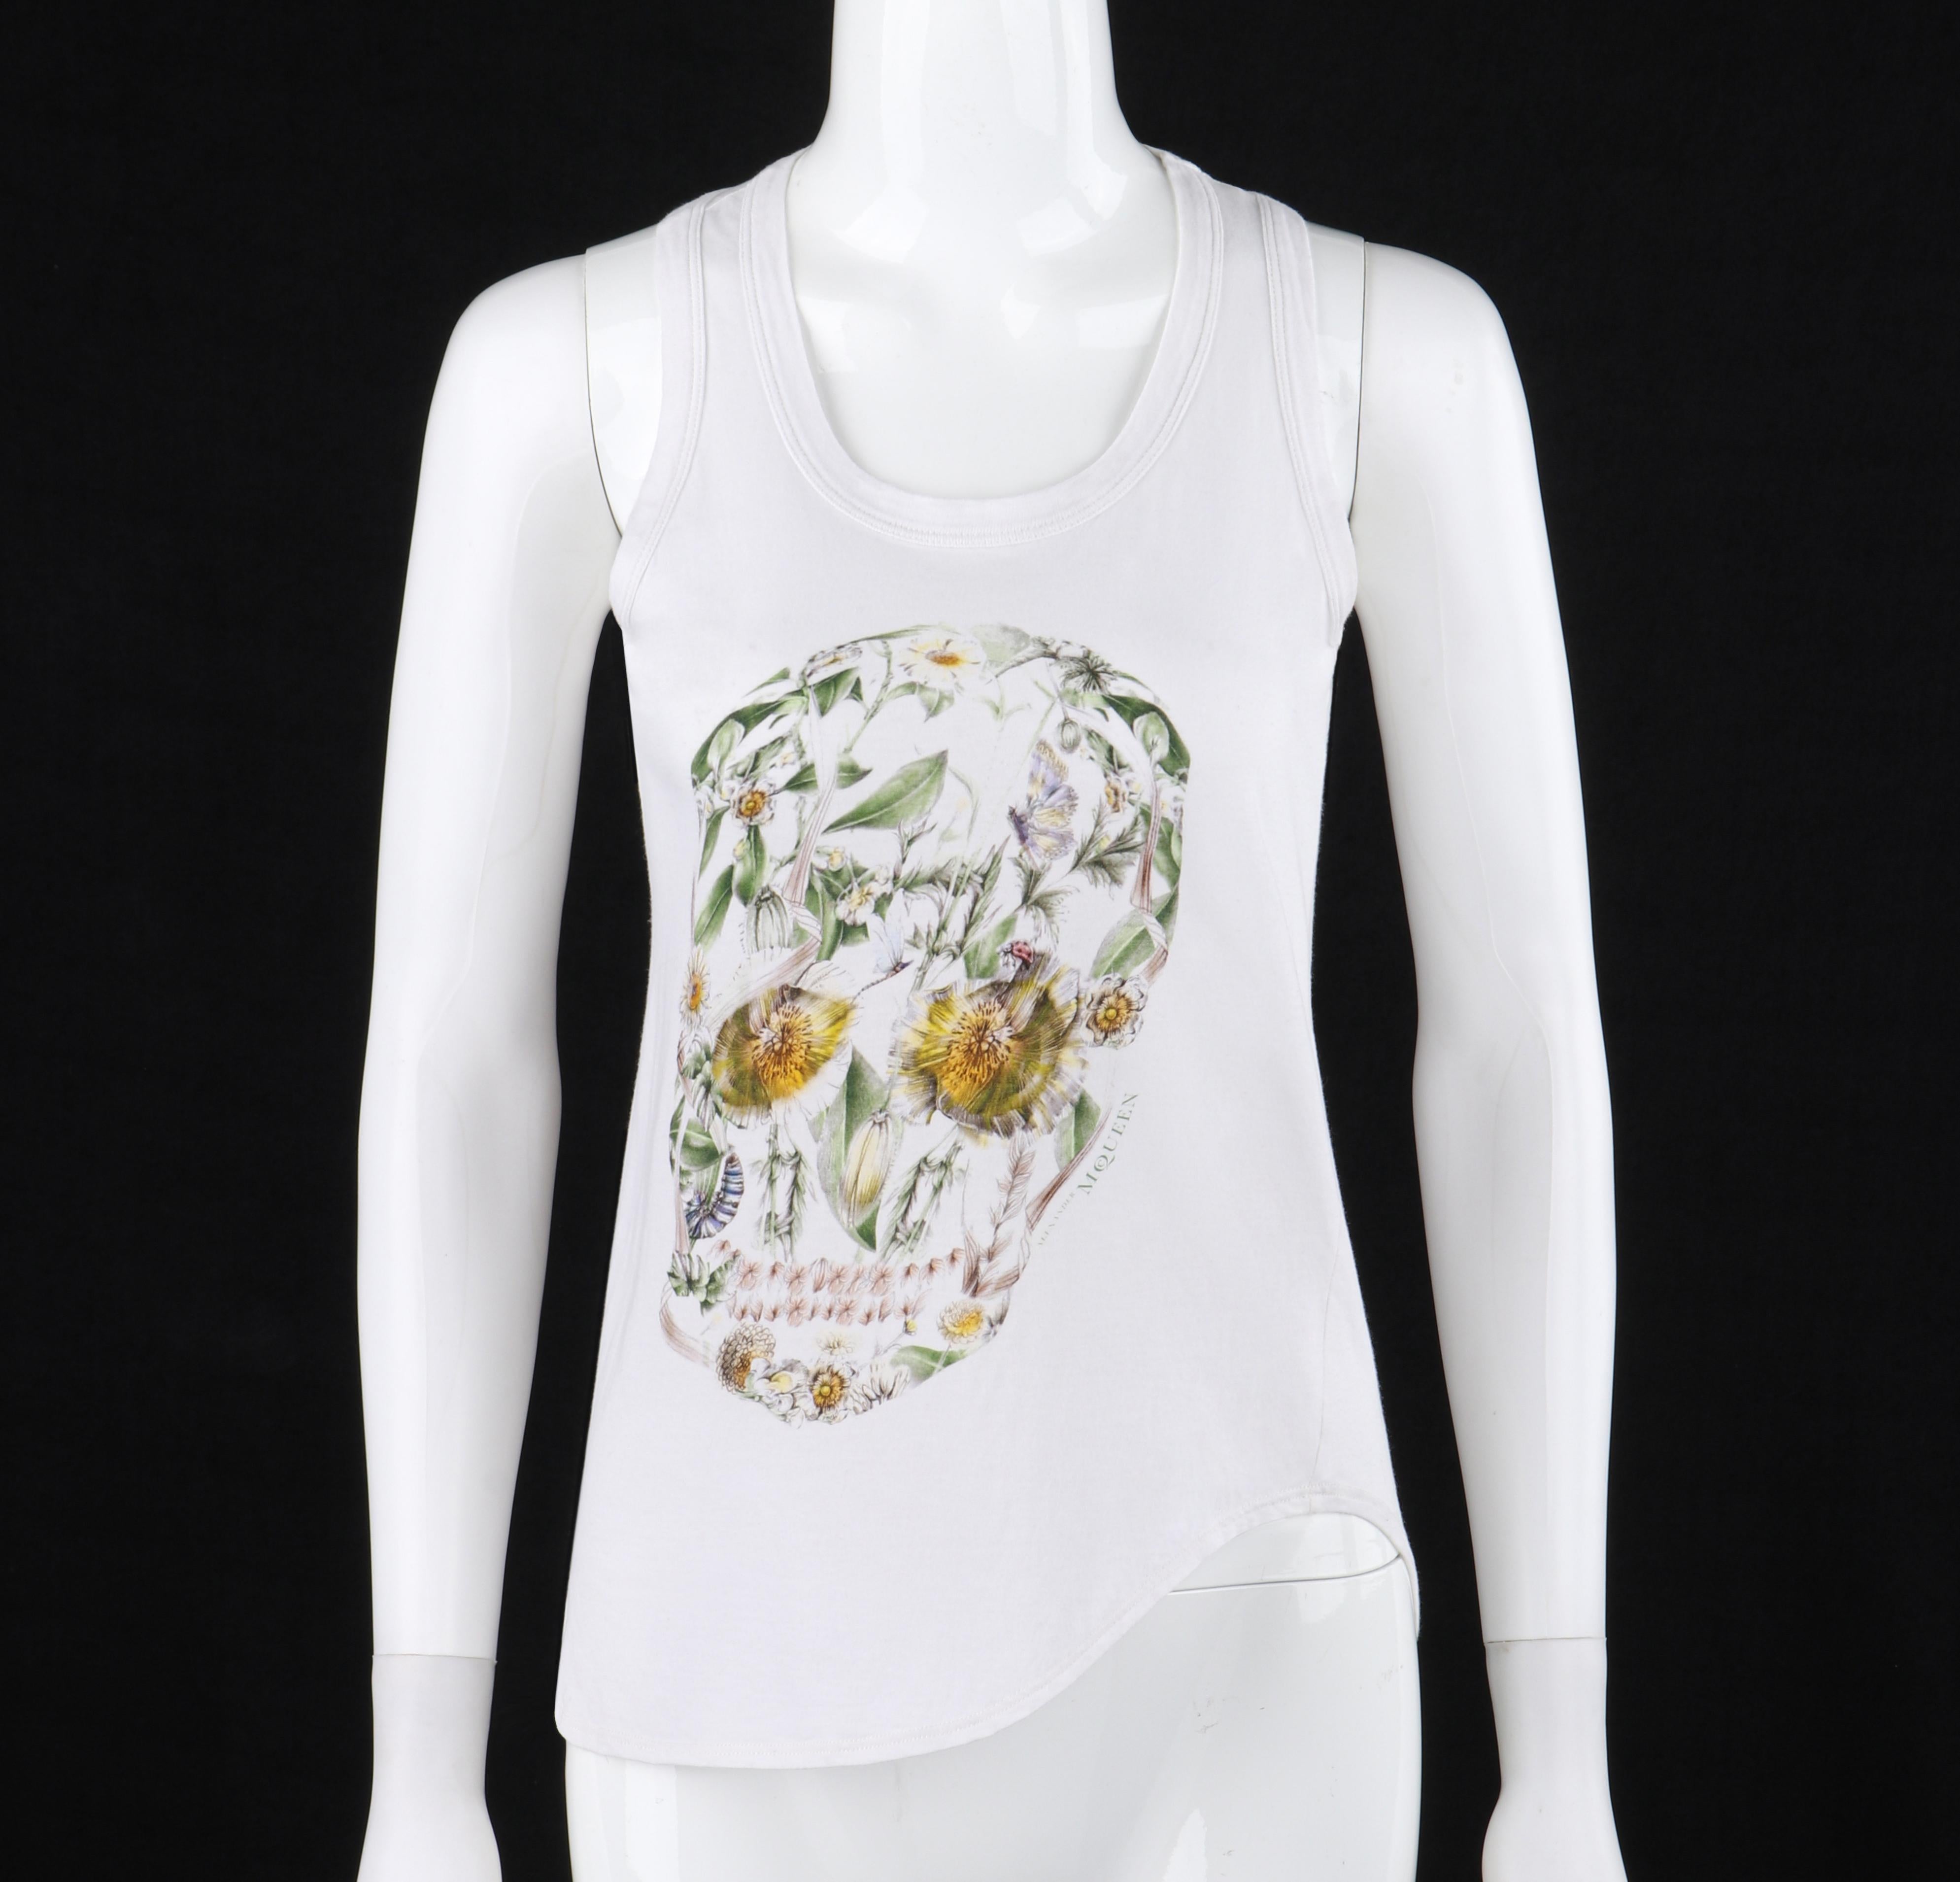 Brand / Manufacturer:  Alexander McQueen
Collection: S/S 2009
Designer: Alexander McQueen
Style: Tank Top
Color(s): Shades of black, white, yellow, green, pink, blue, and purple
Lined: No
Marked Fabric Content: 